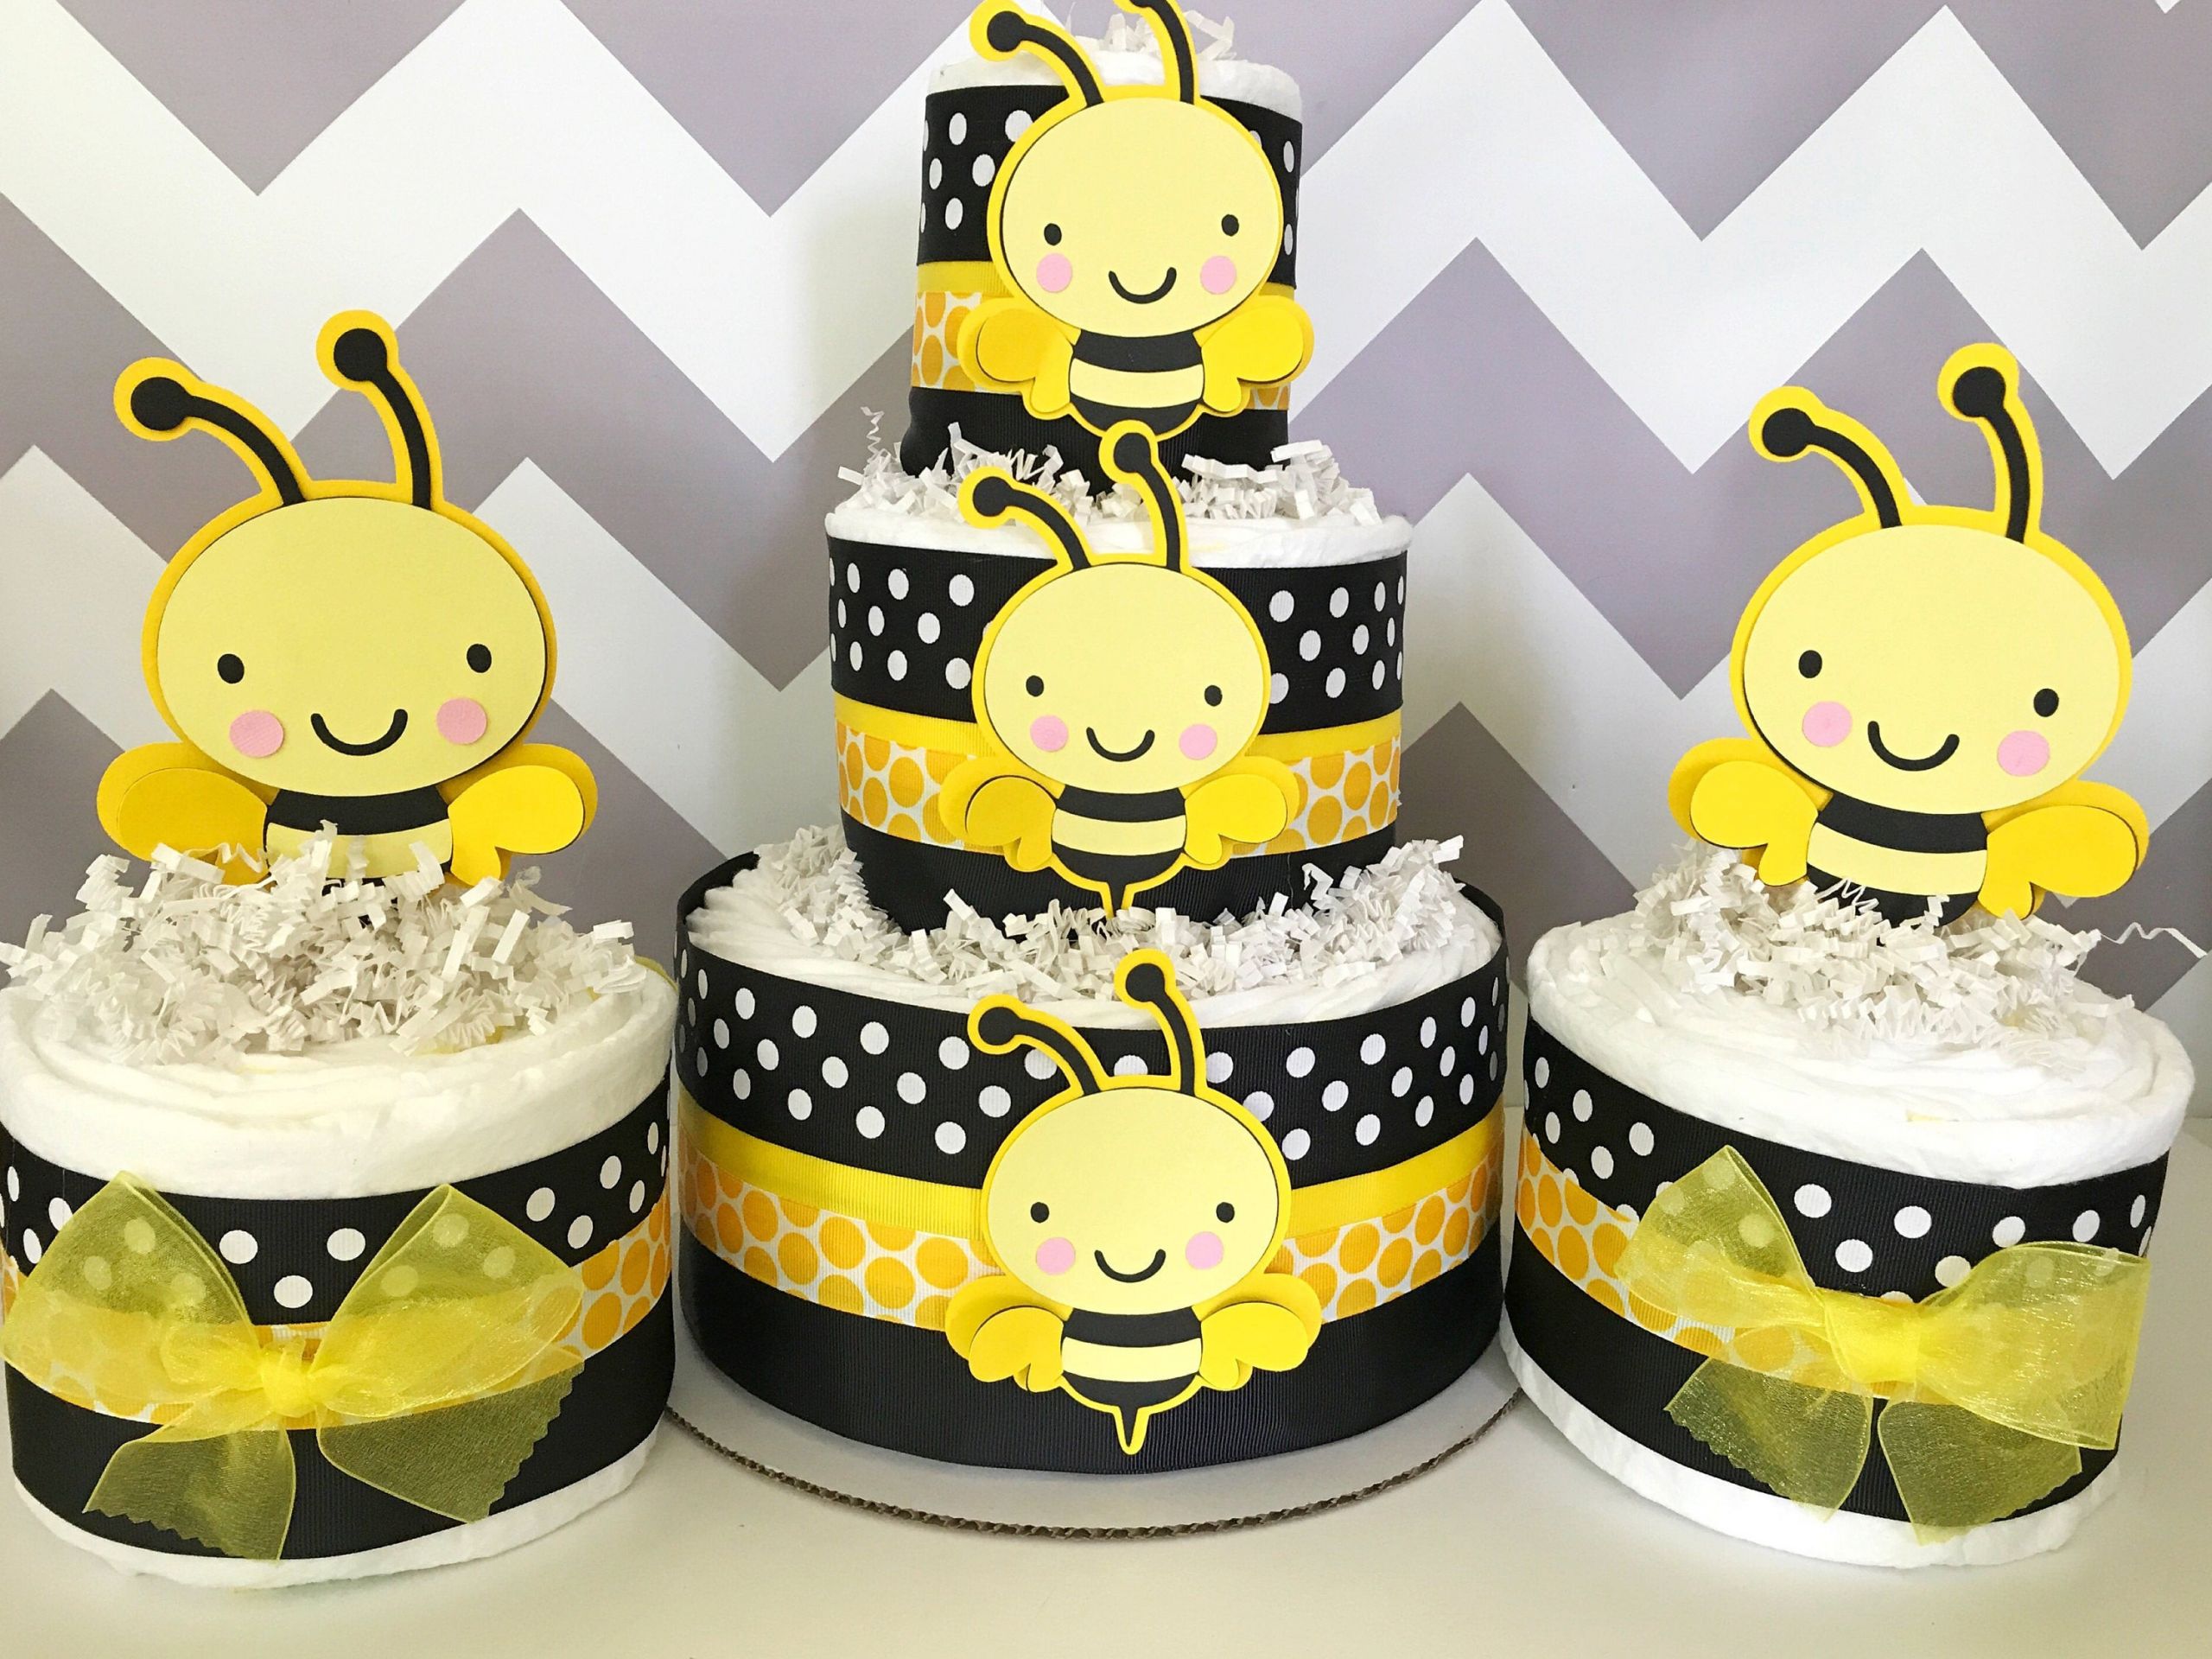 Baby Cake Toppers Party City
 SET OF 3 Bumble Bee Diaper Cakes Bumble Bee Baby Shower